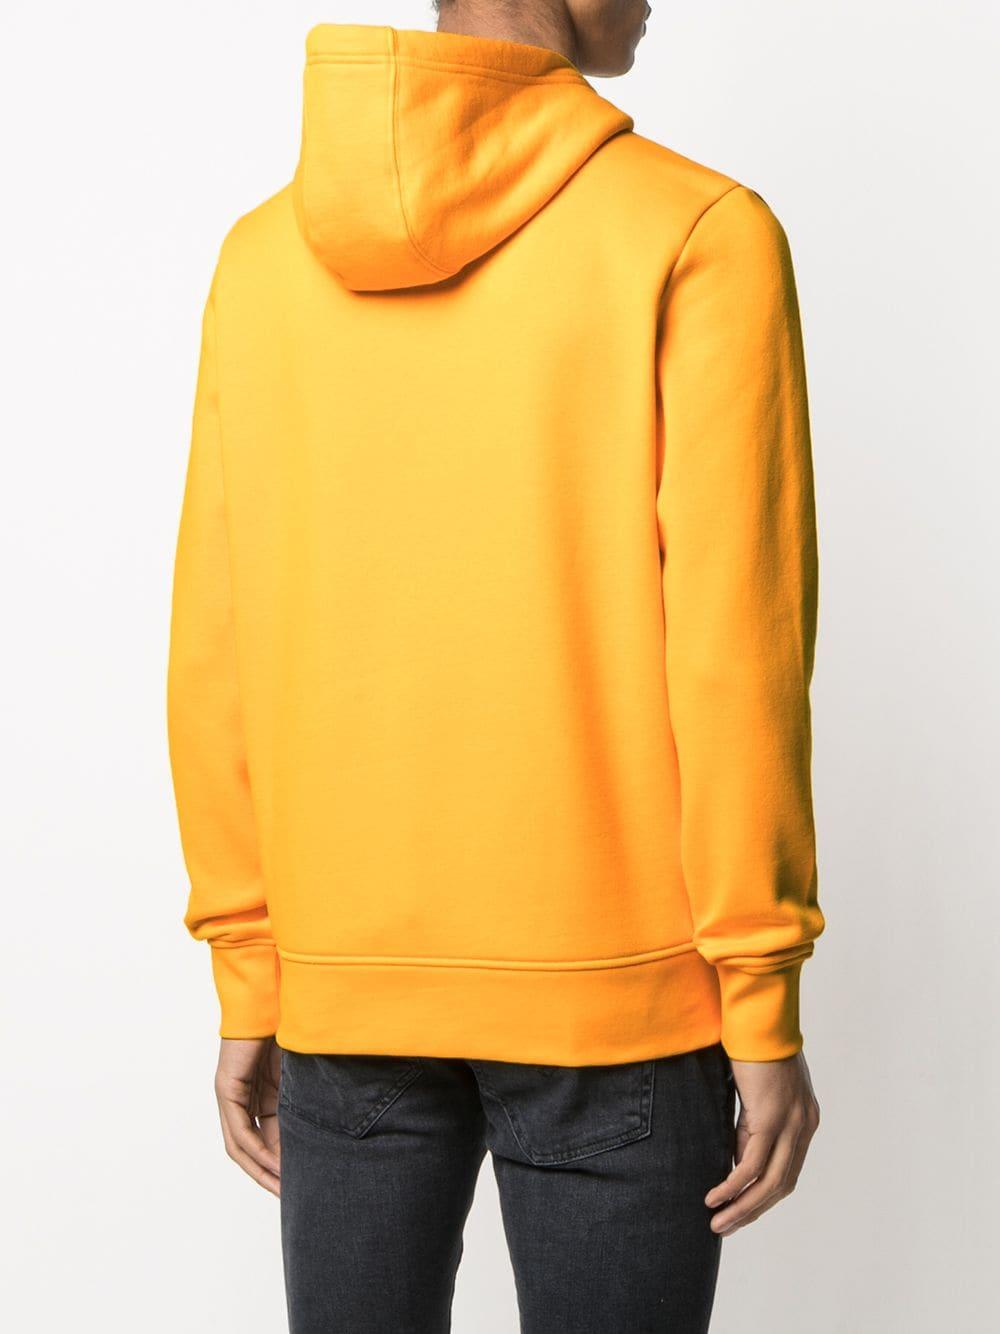 Tommy Hilfiger Cotton Logo-print Hoodie in Yellow for Men - Lyst